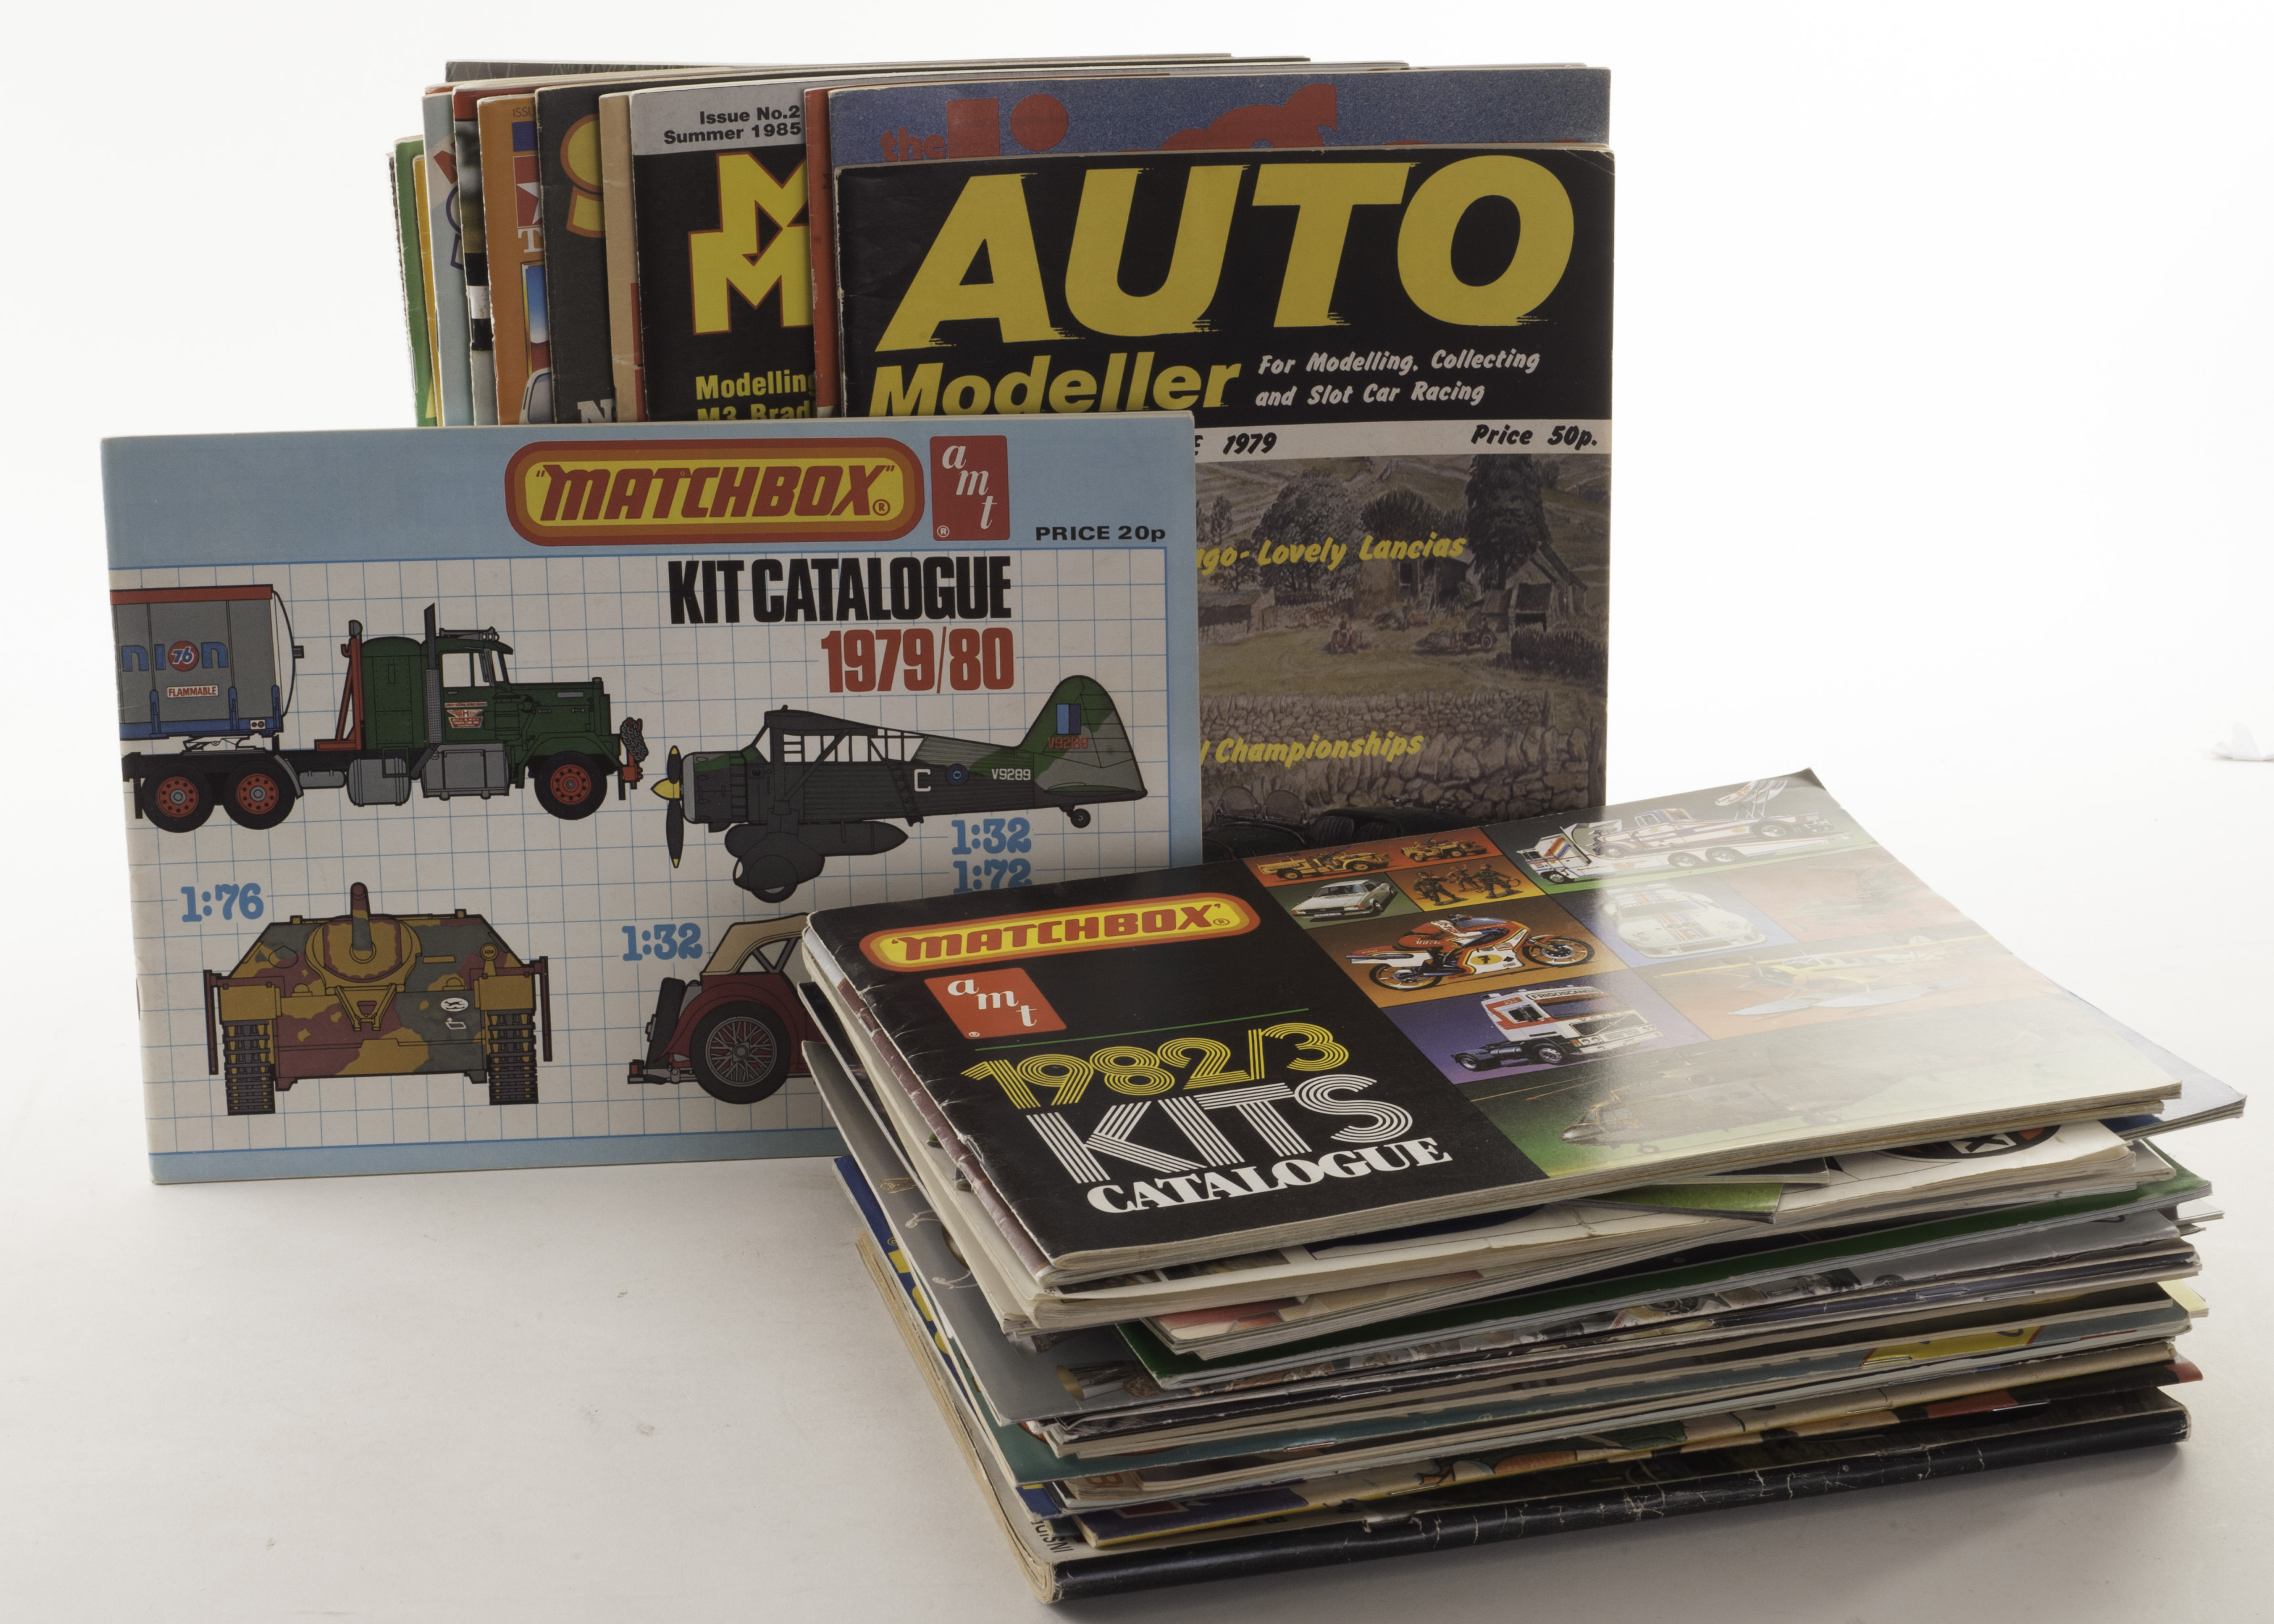 Model Kit Catalogues & Magazines, including Revell 74, 75/76, Airfix 9th, 15th, 16th, 17th, Robbe,